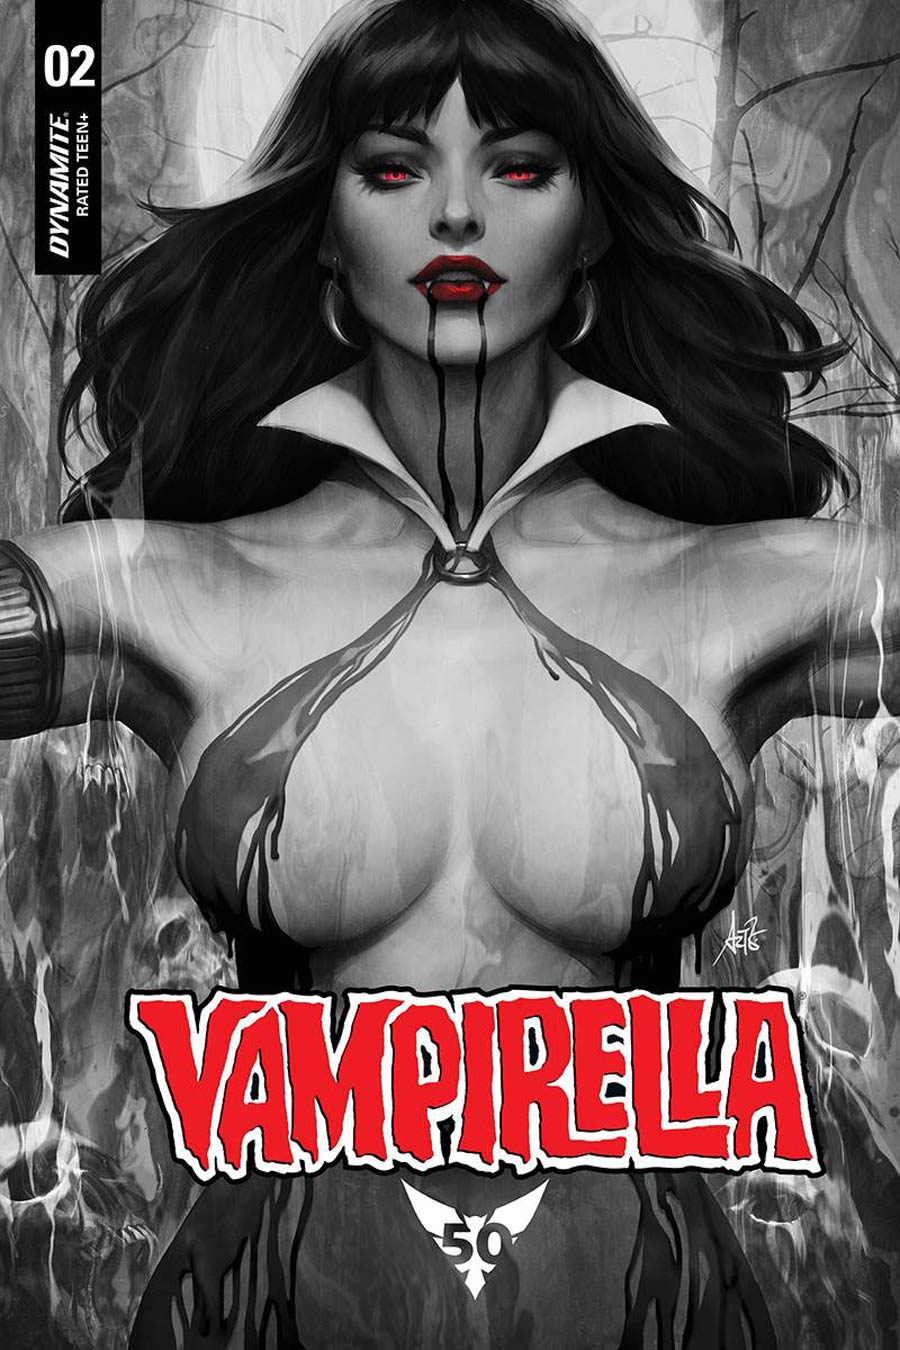 Vampirella Vol 8 #2 Cover S Ultra-Limited Stanley Artgerm Lau Noir Cover With Dress